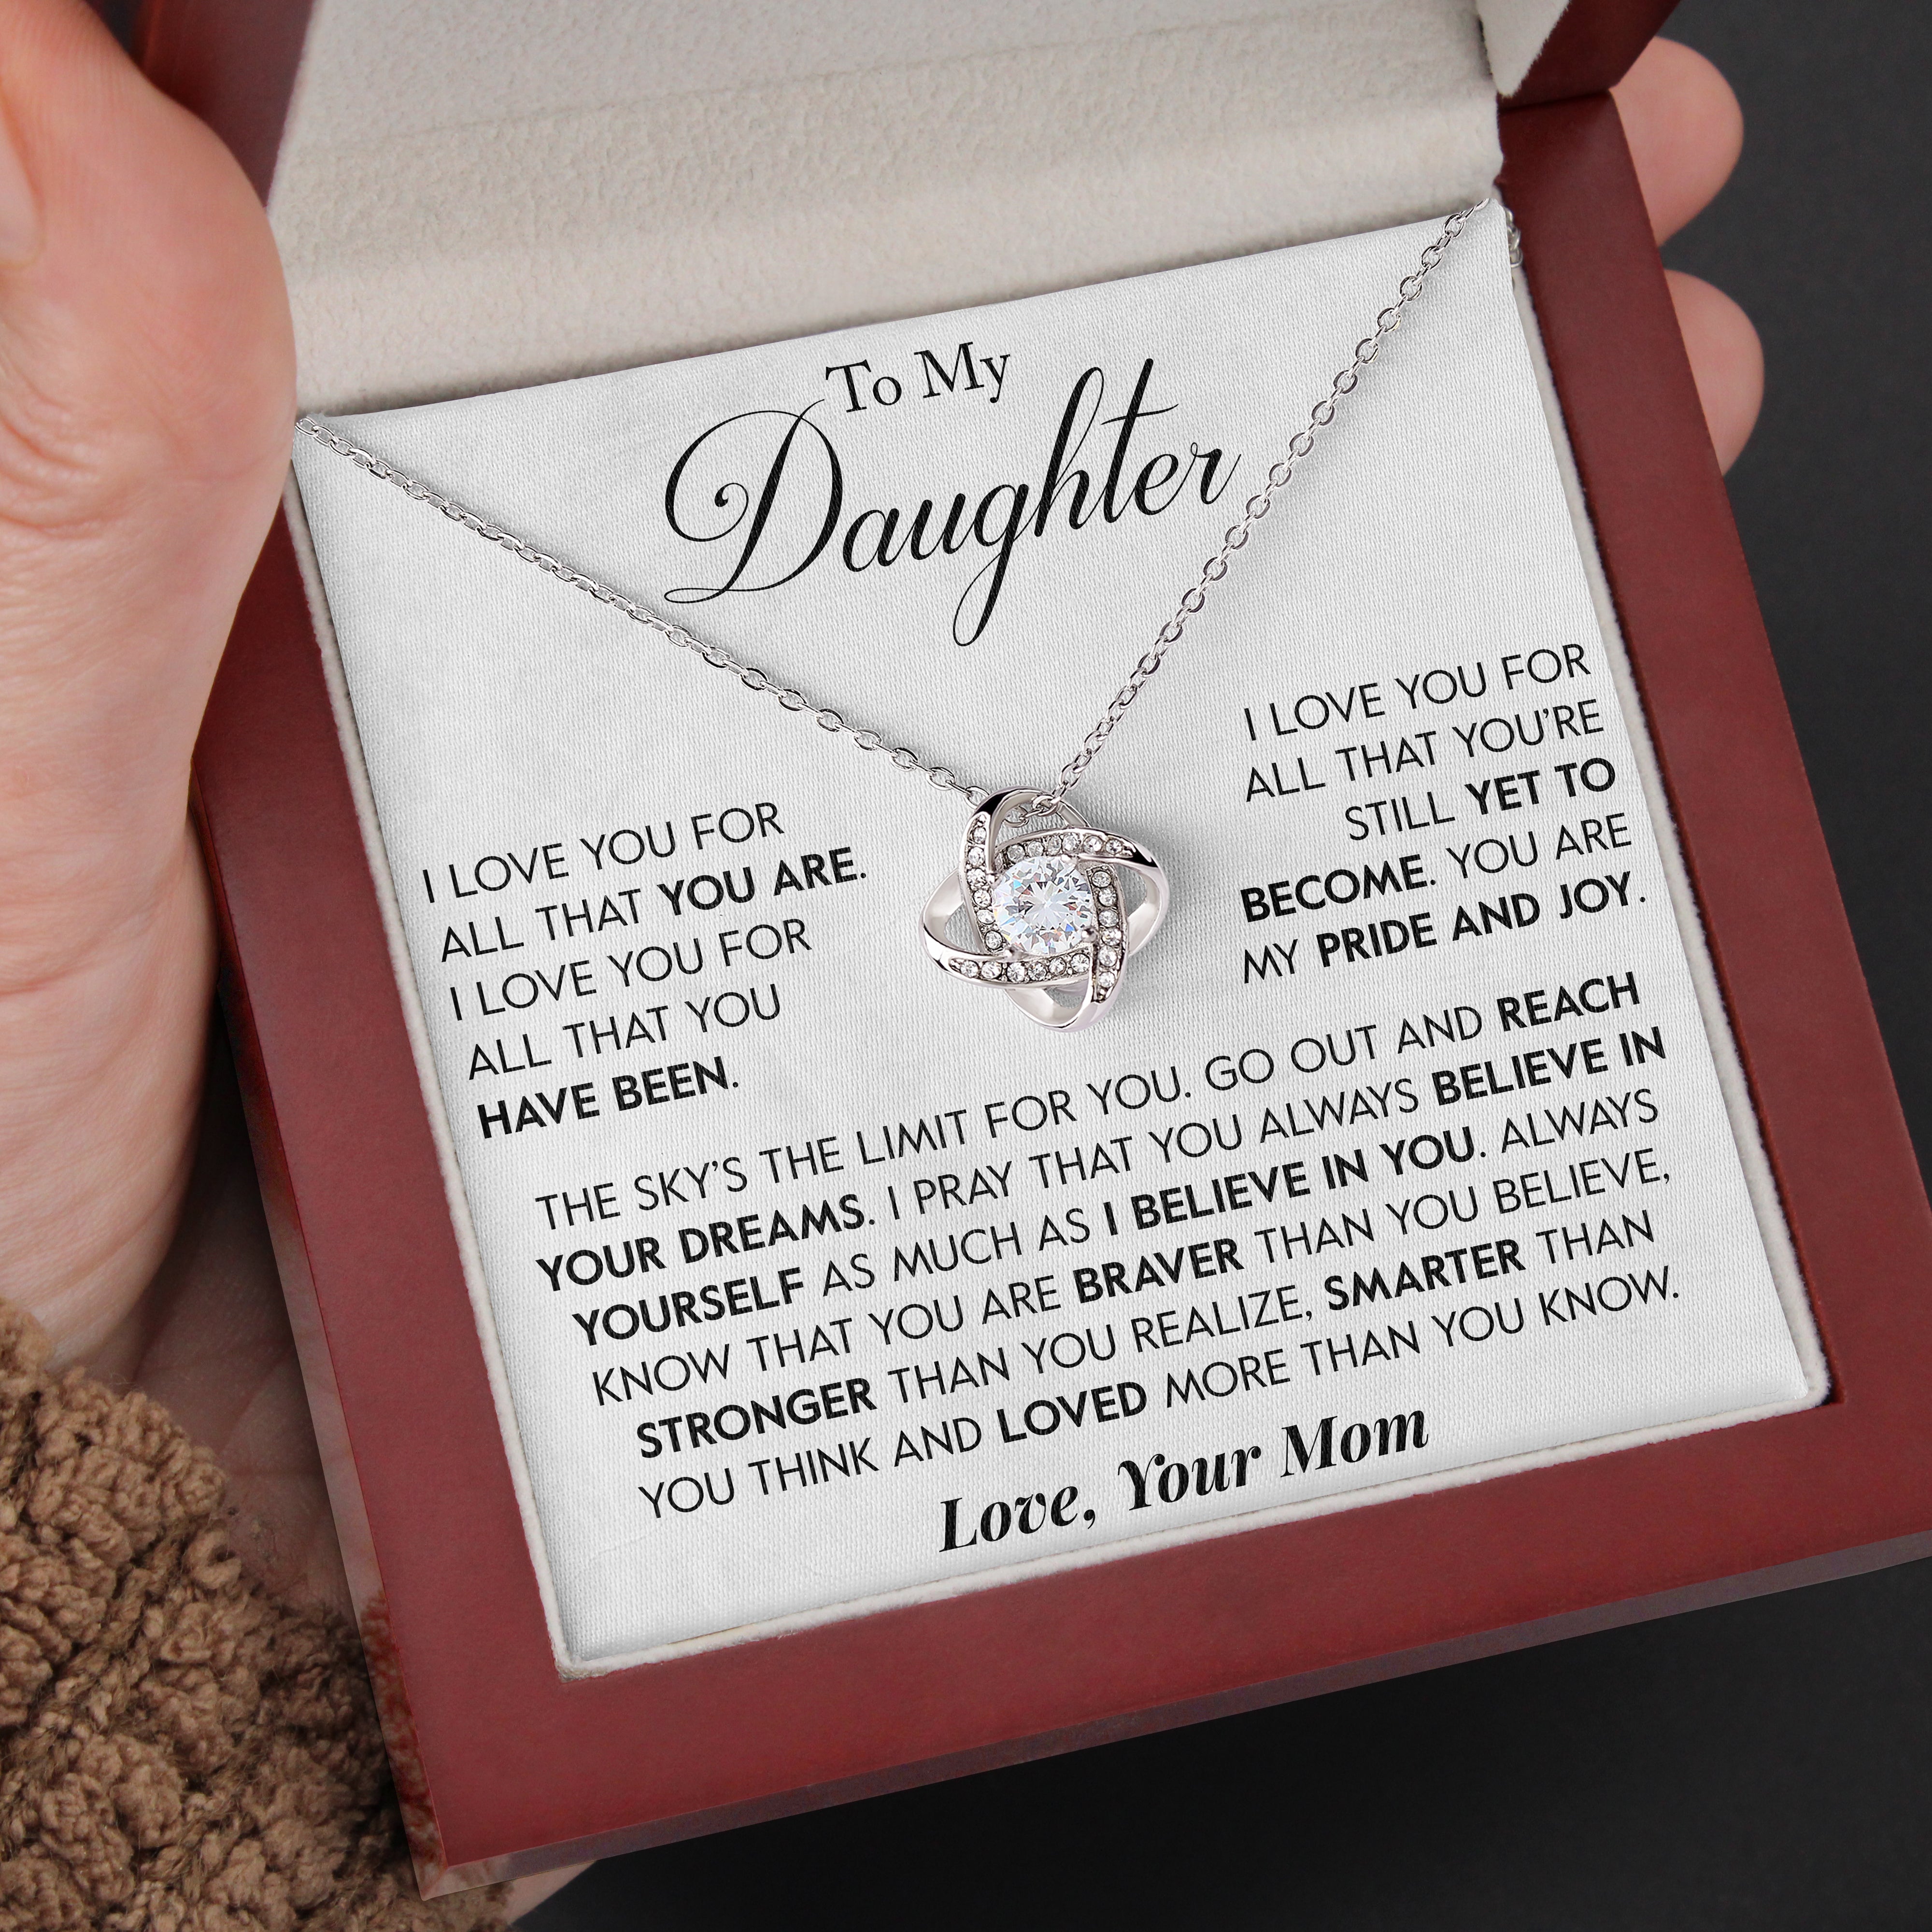 To My Daughter | "My Pride and Joy" | Love Knot Necklace